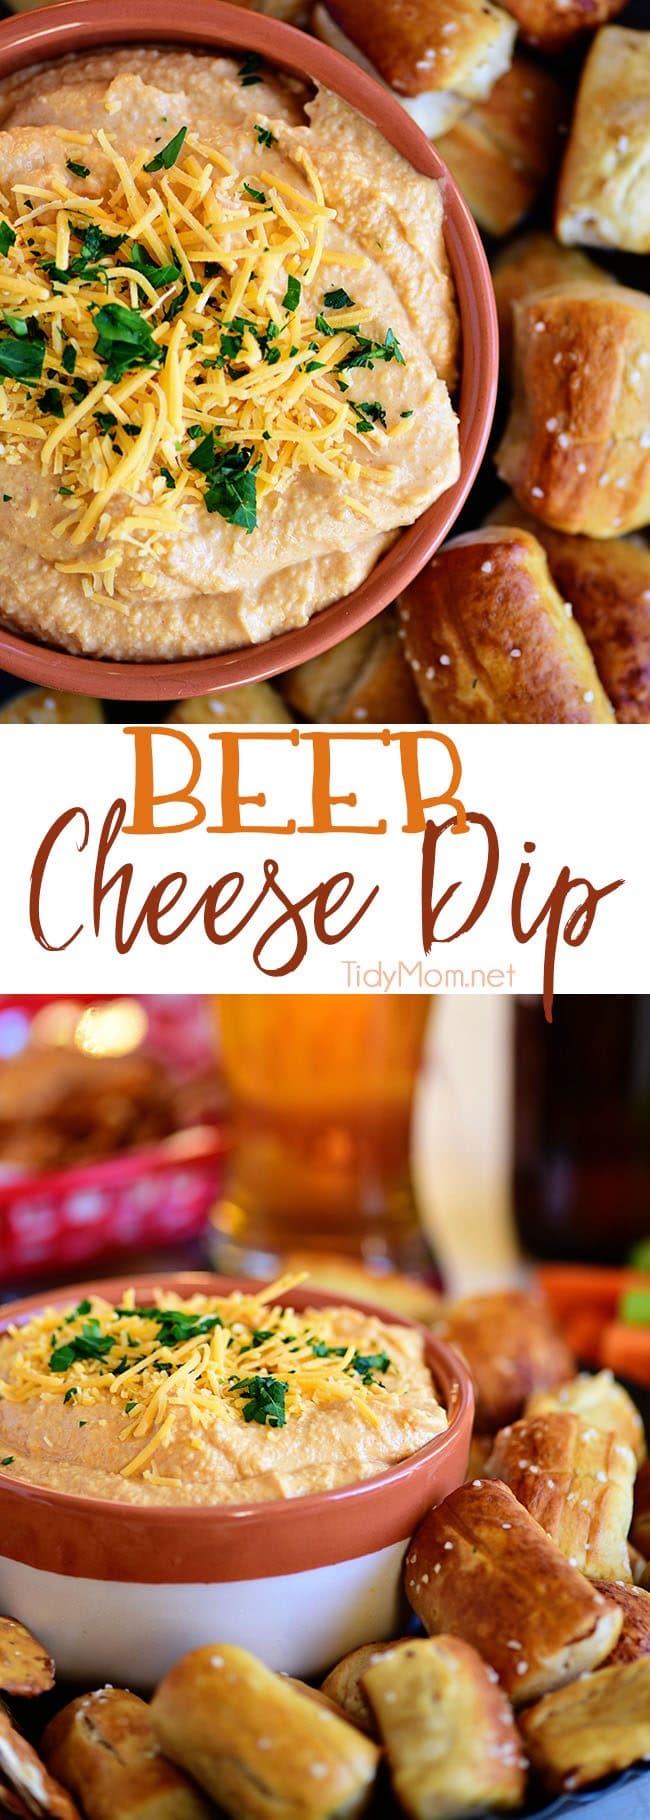 Pub-style Beer Cheese Dip in bowl photo collage